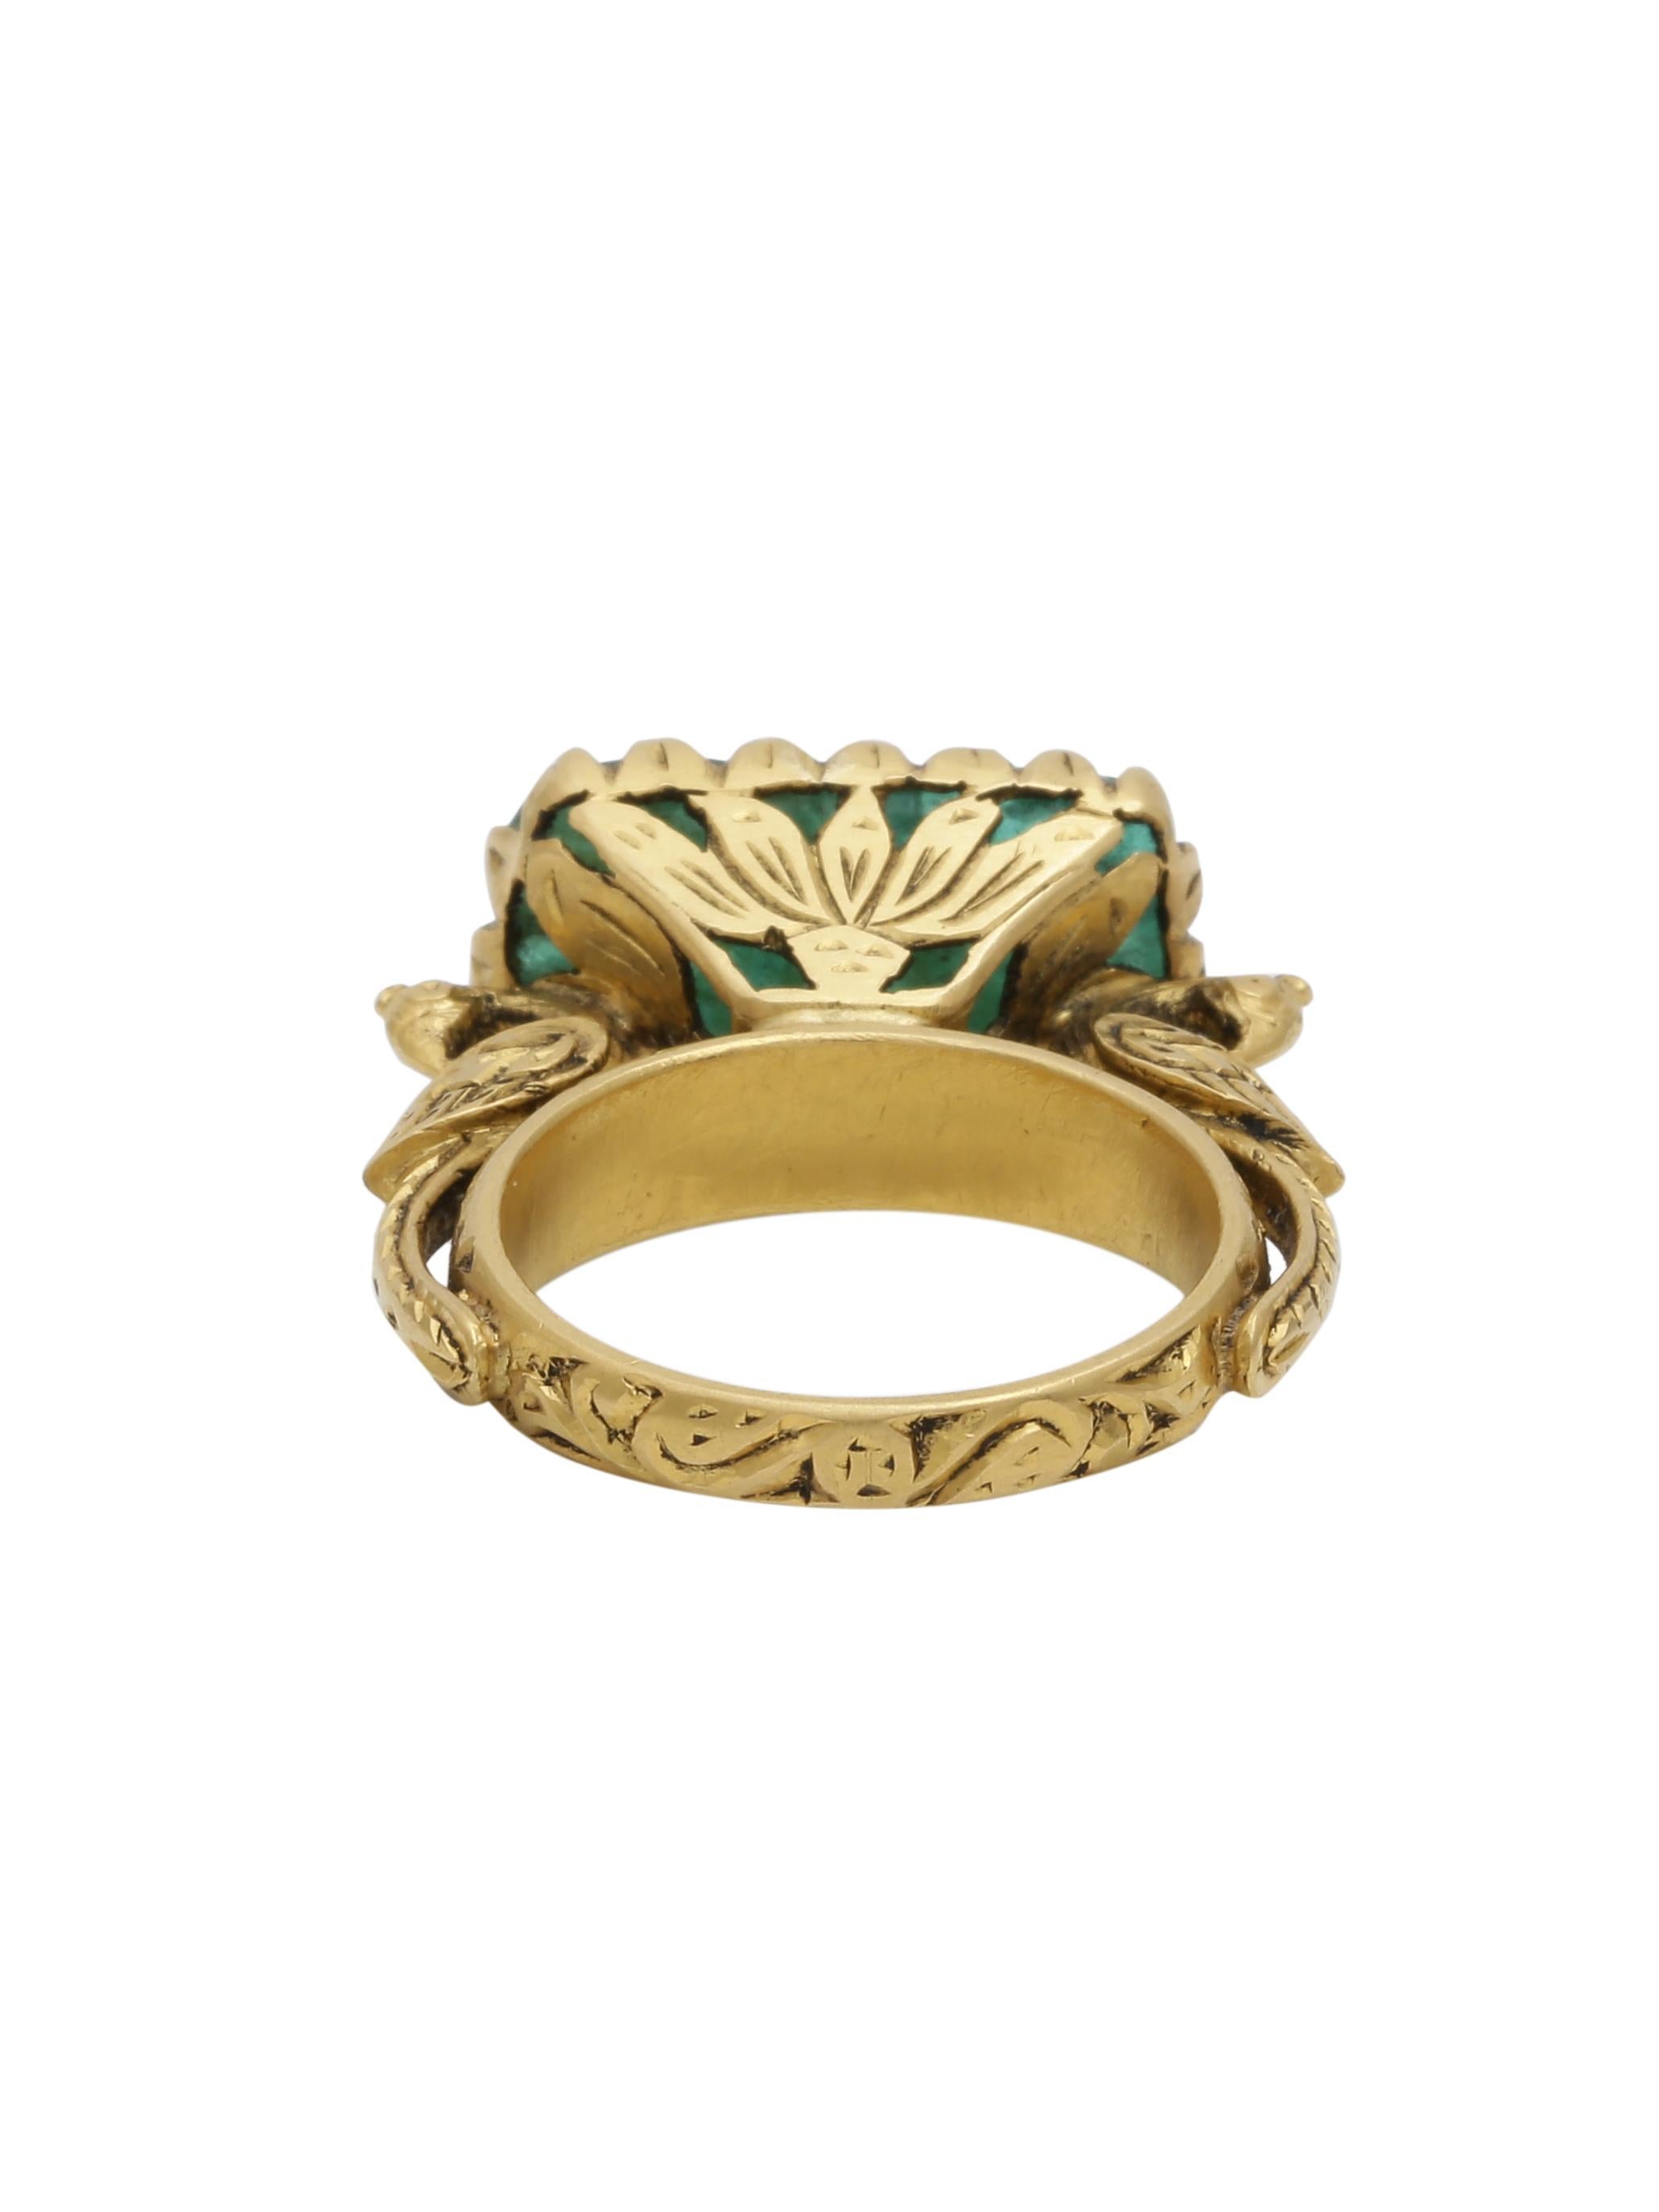 A Beautifully hand Carved Zambian Emerald set in a hand made 22K Gold Ring. The ring has intricate gold work and right below the stone are 2 magnificent peacocks holding the stone. The carved stone is inspired from the Mughal times when the Mughal